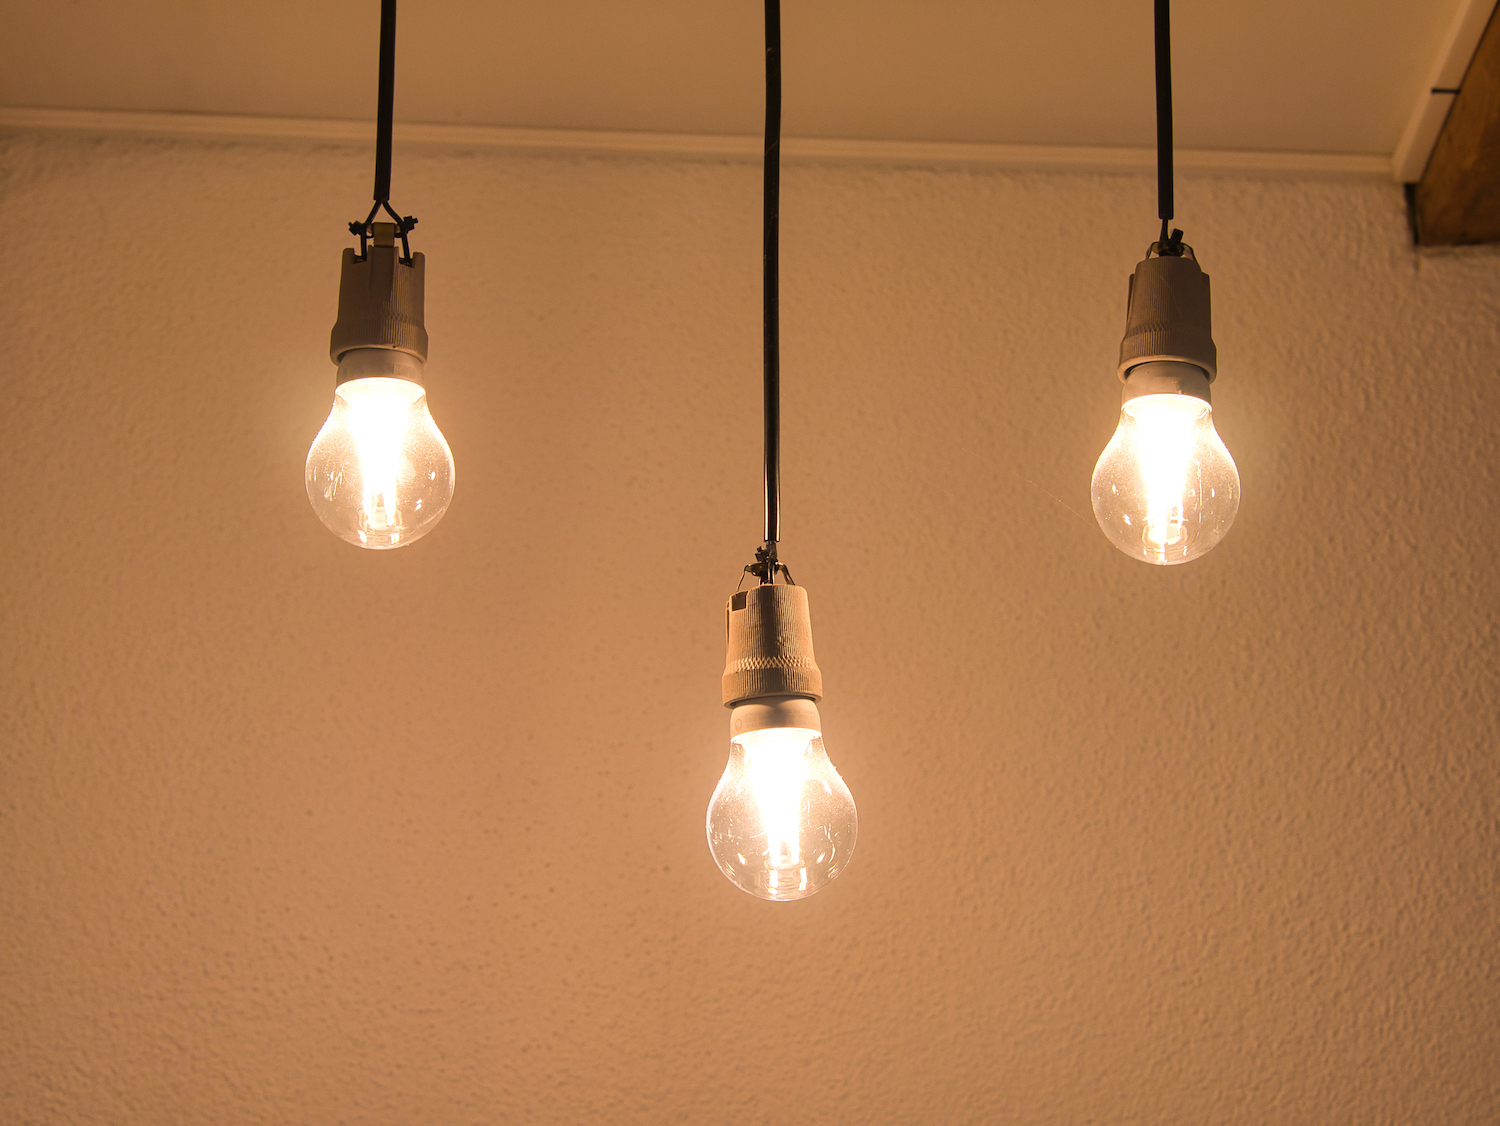 three light bulbs hanging from the ceiling